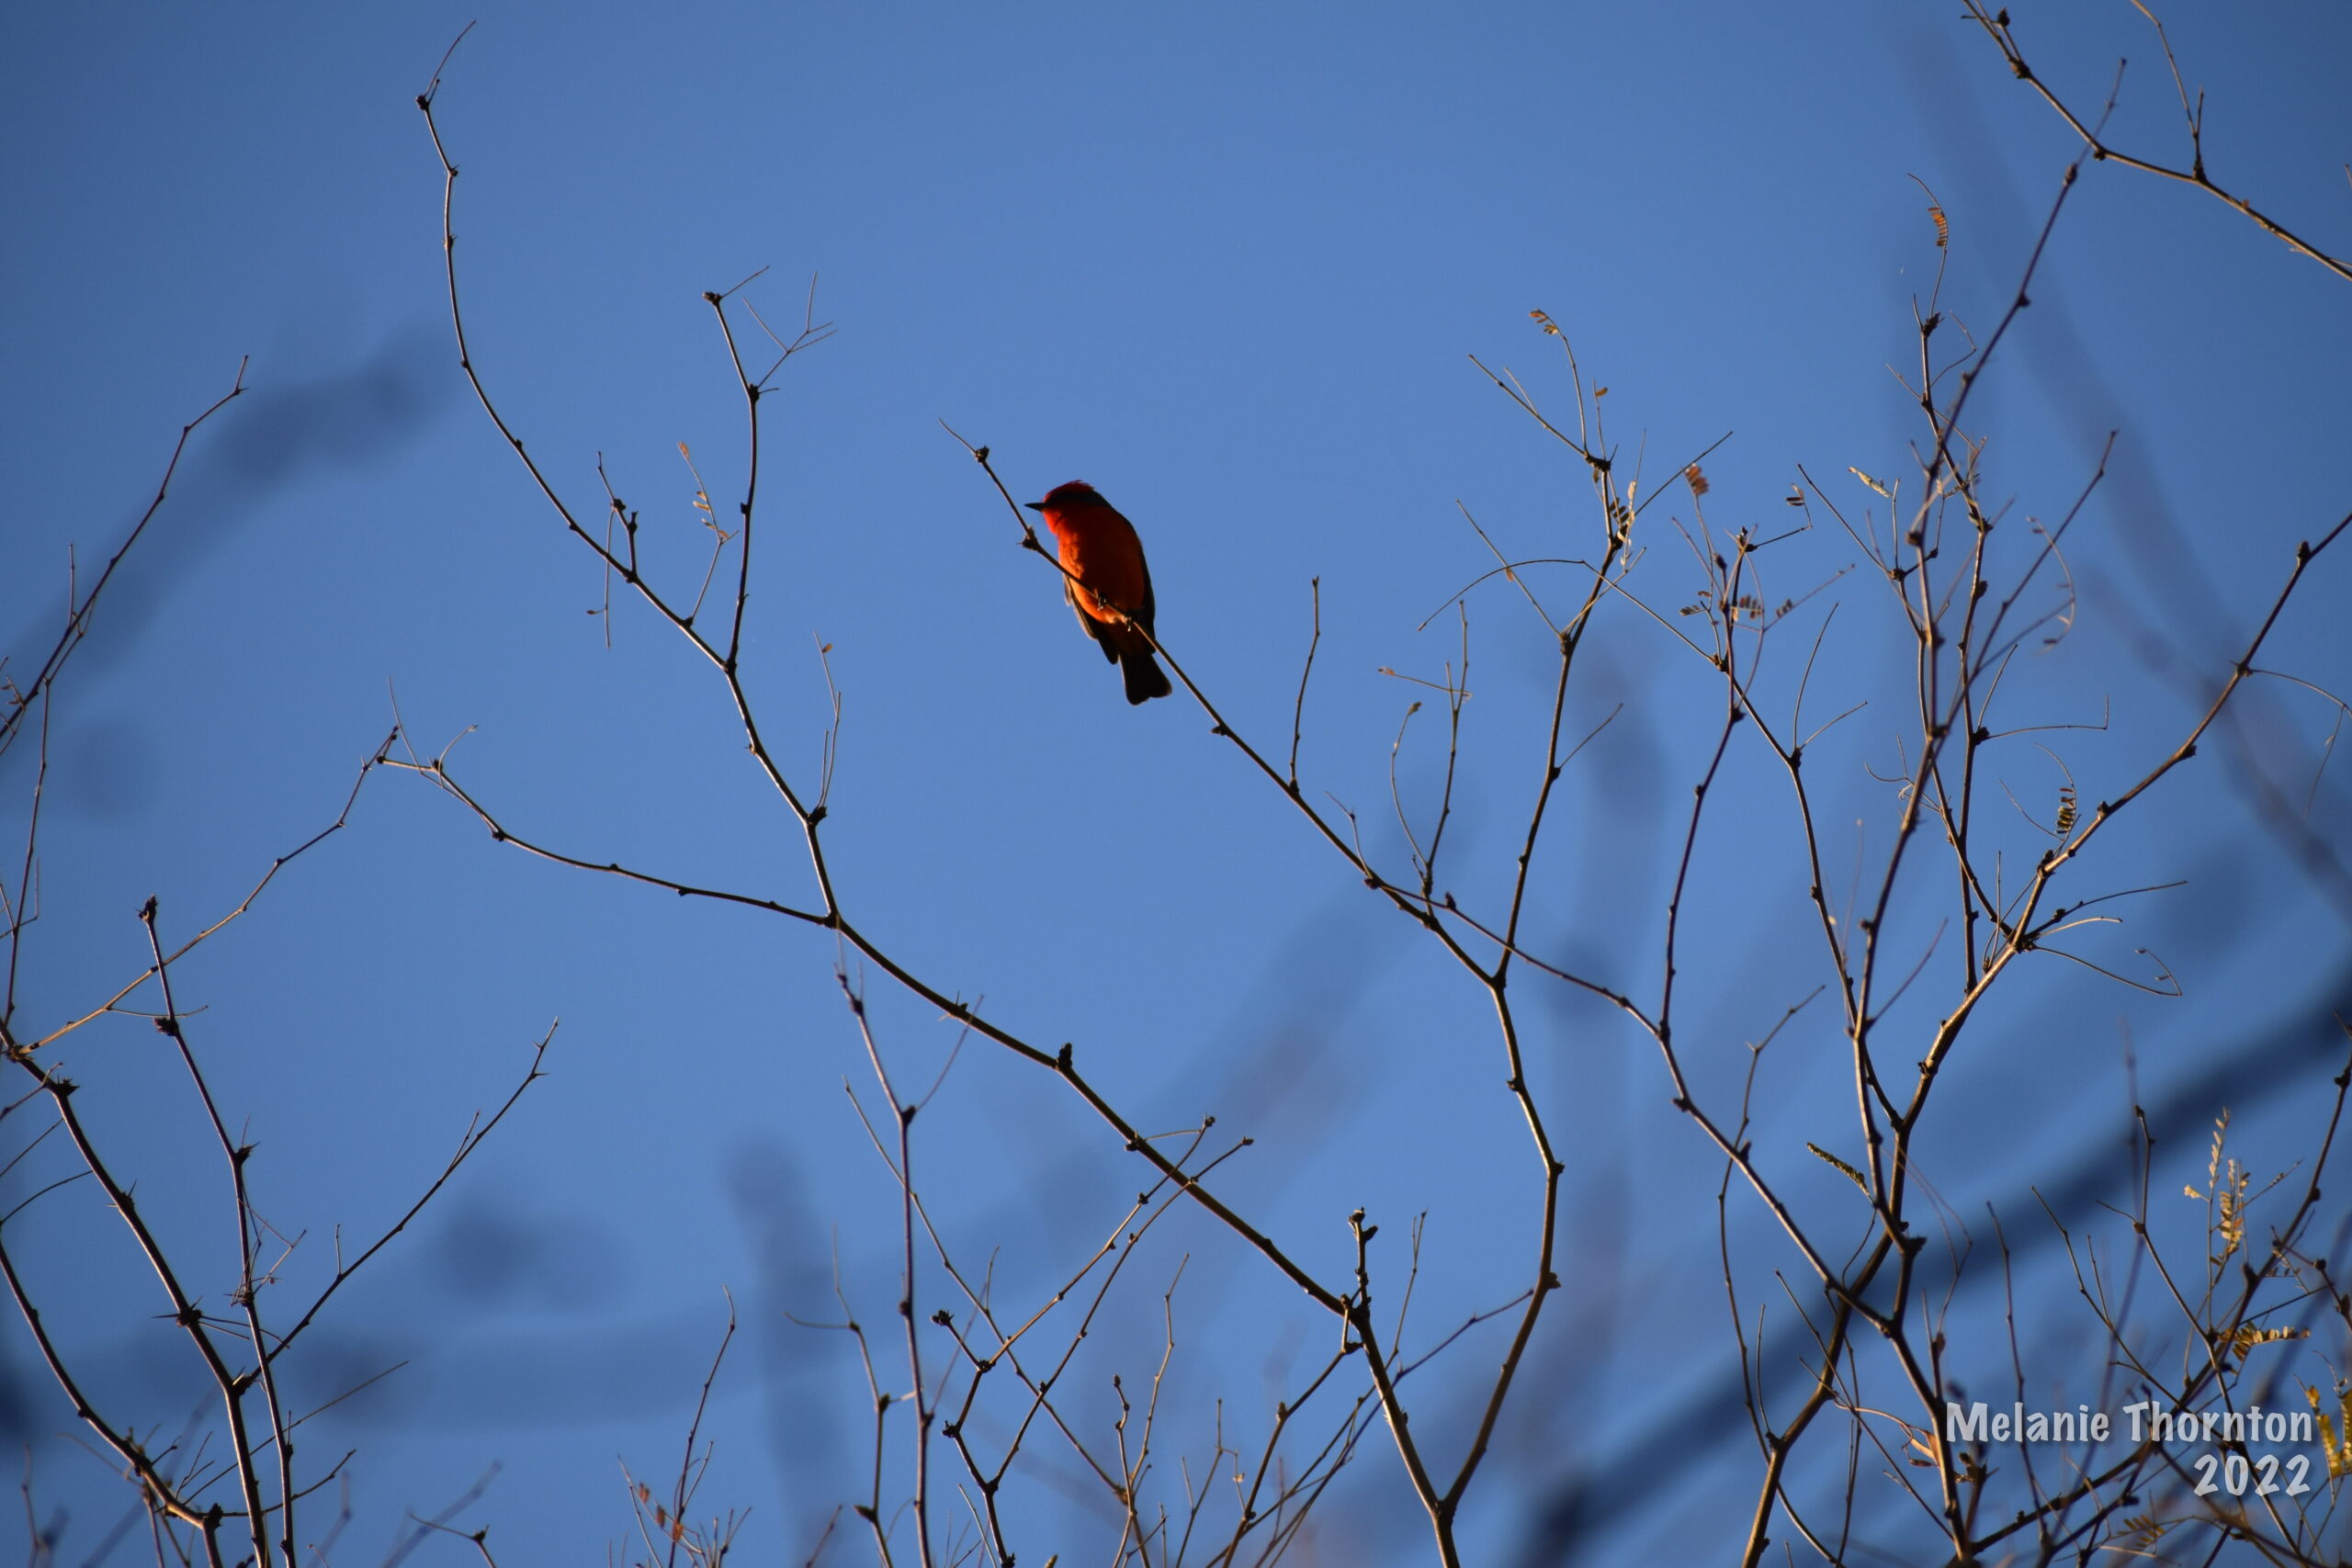 A bright red and black bird sits on a small branch against a blue sky